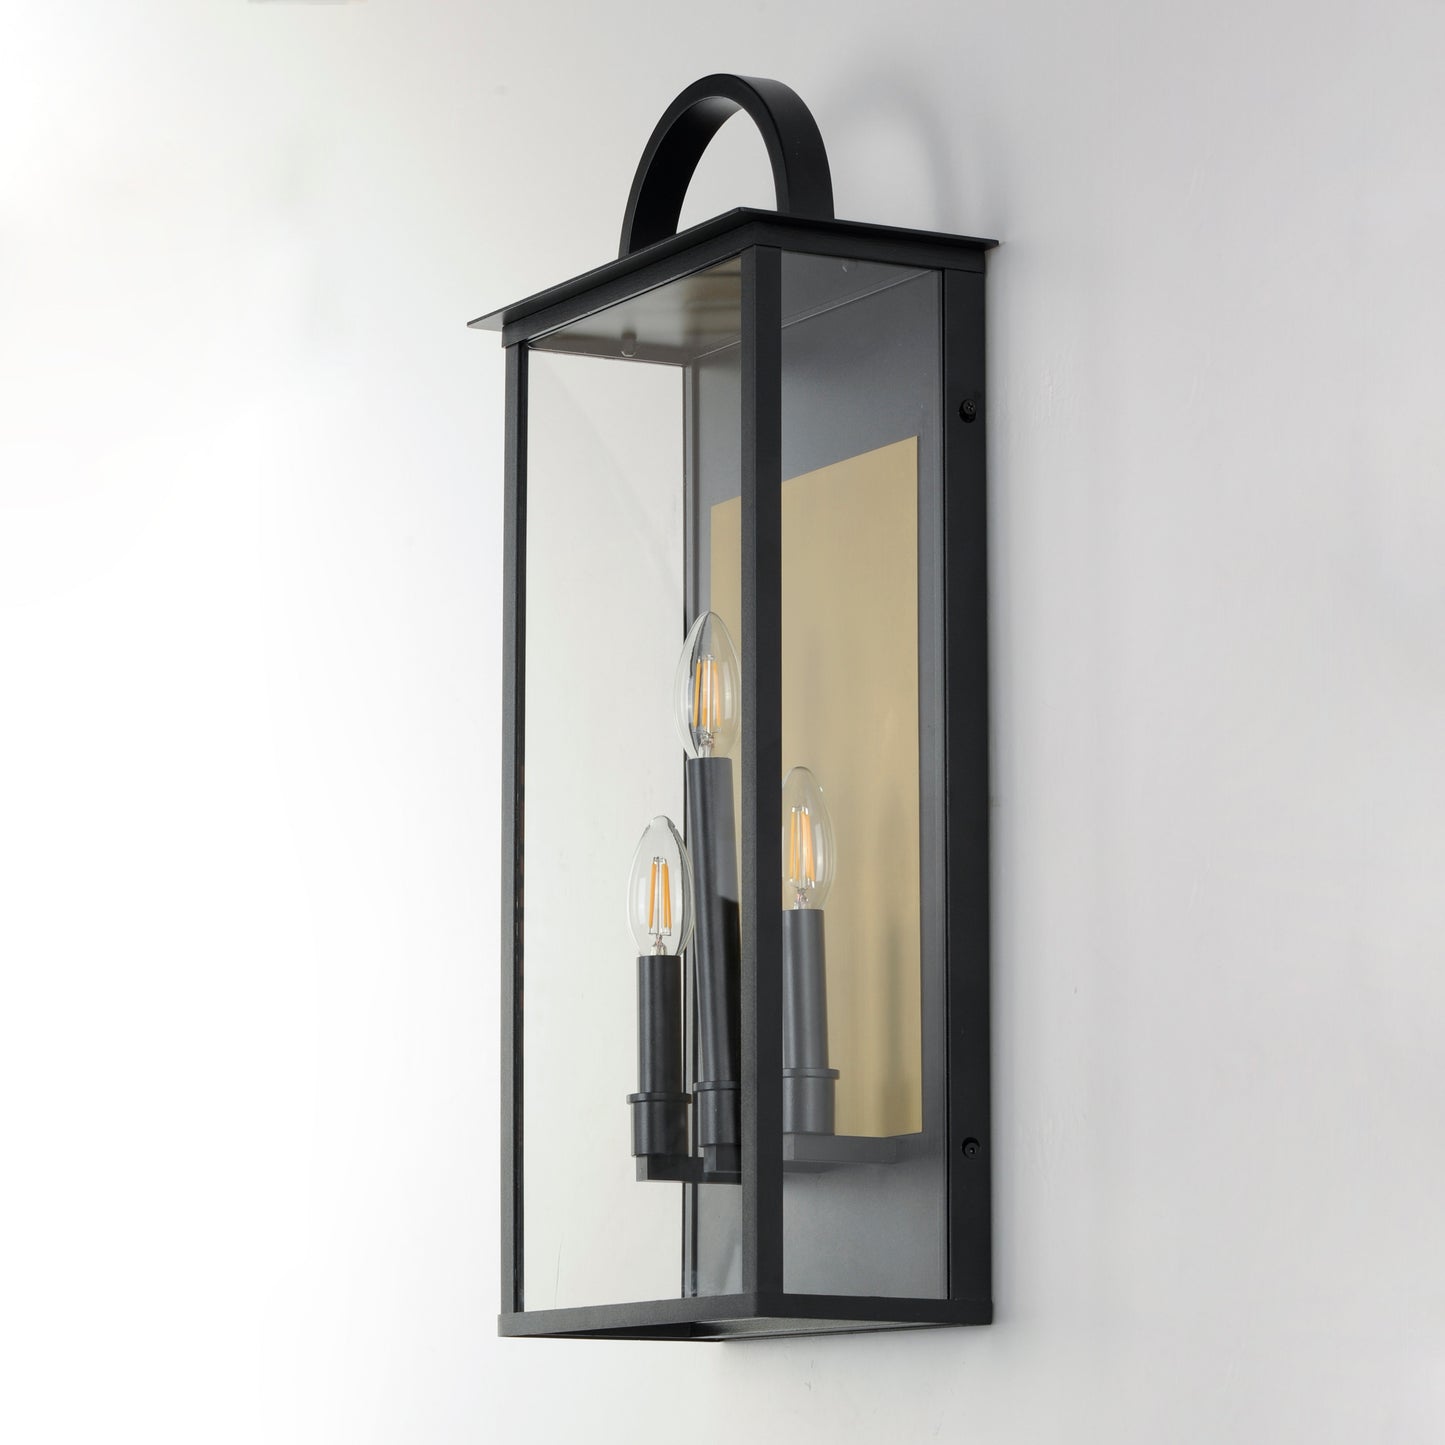 Maxim Manchester 3-Light Large Outdoor Wall Sconce